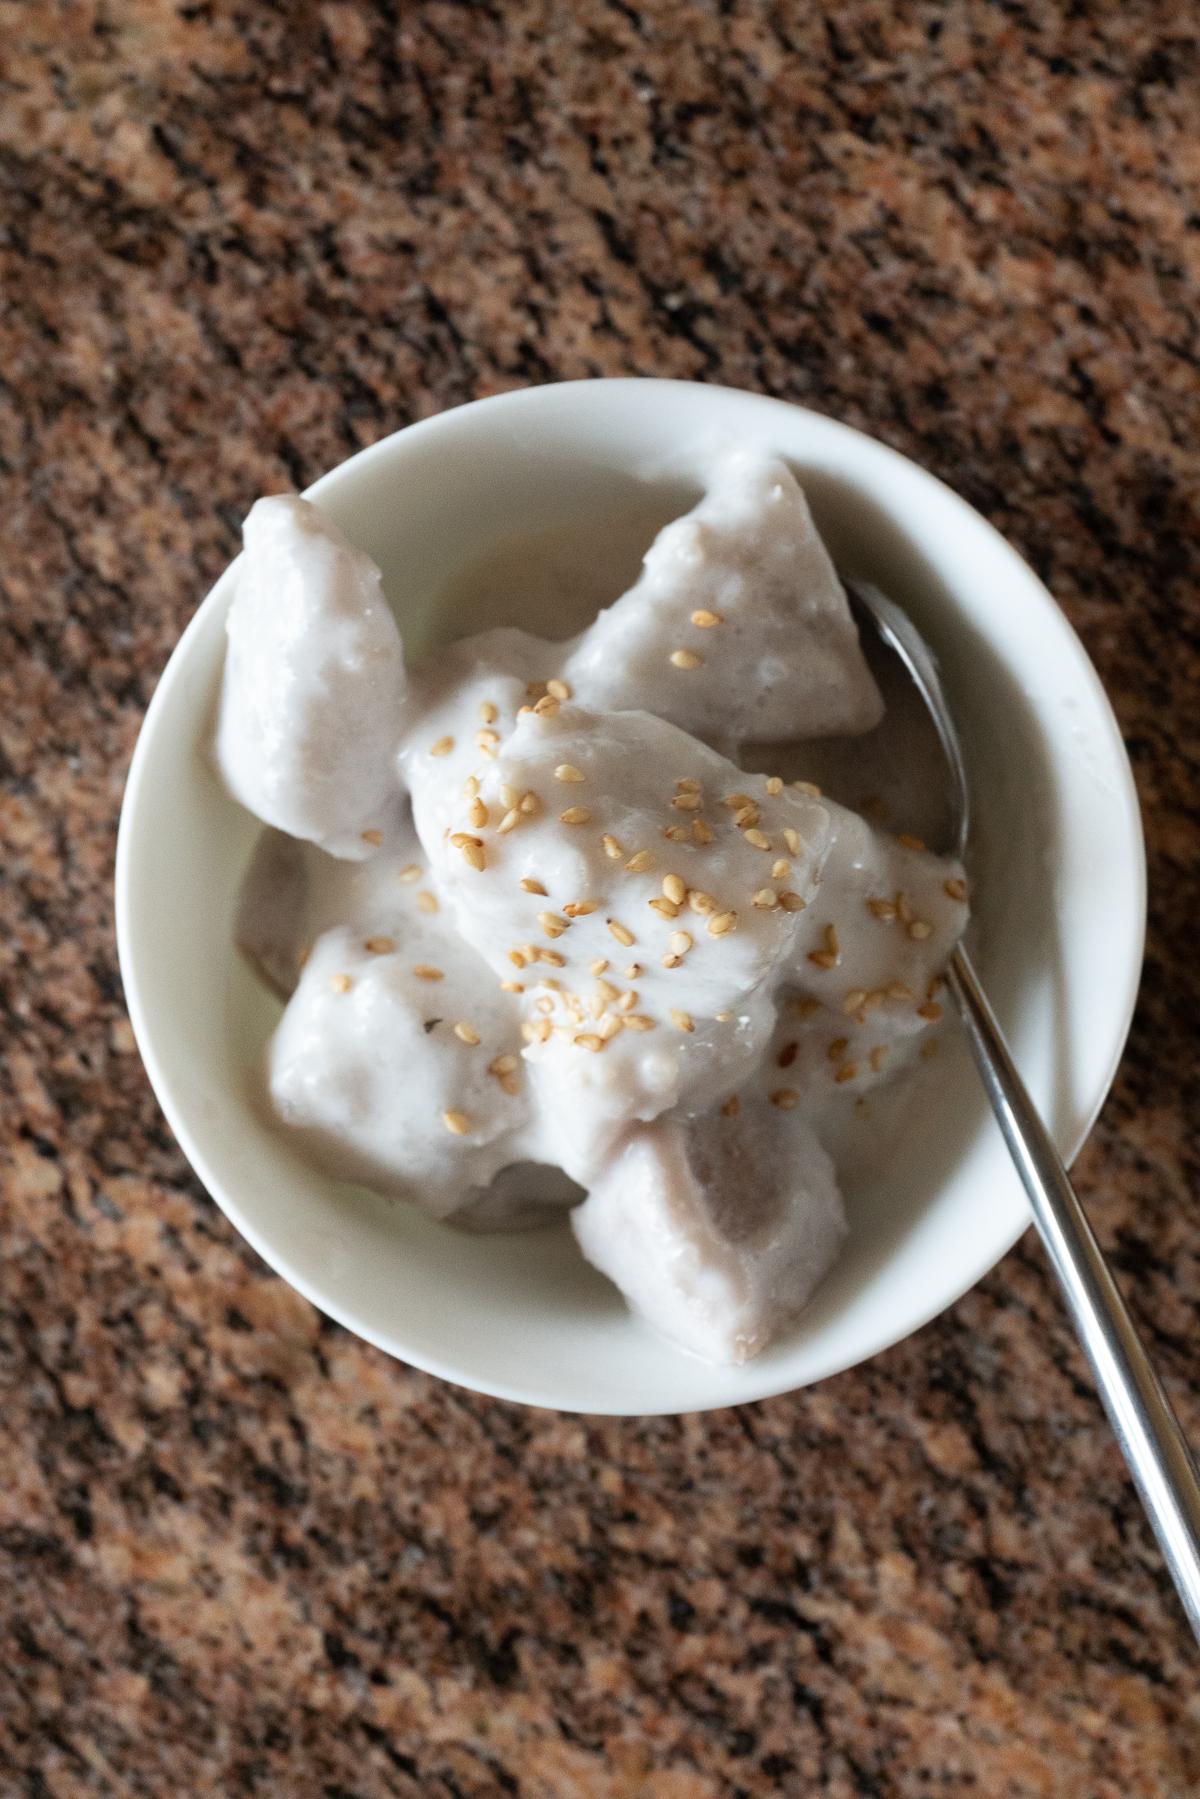 A bowl of Taro with Coconut Milk, topped with sesame seeds.